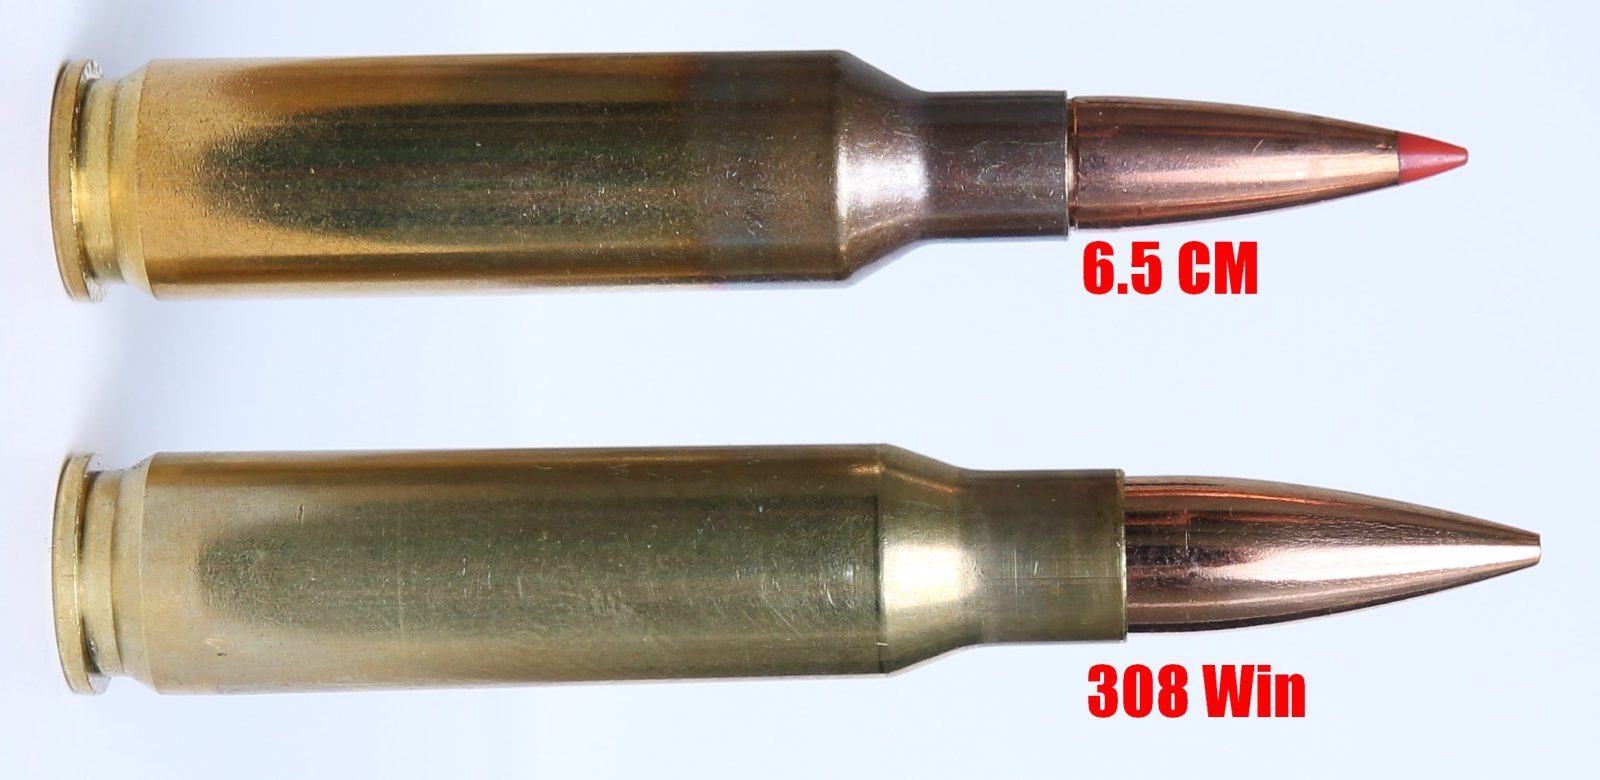 Photo compairing the 6.5 Creedmoor vs 308 Winchester bullets